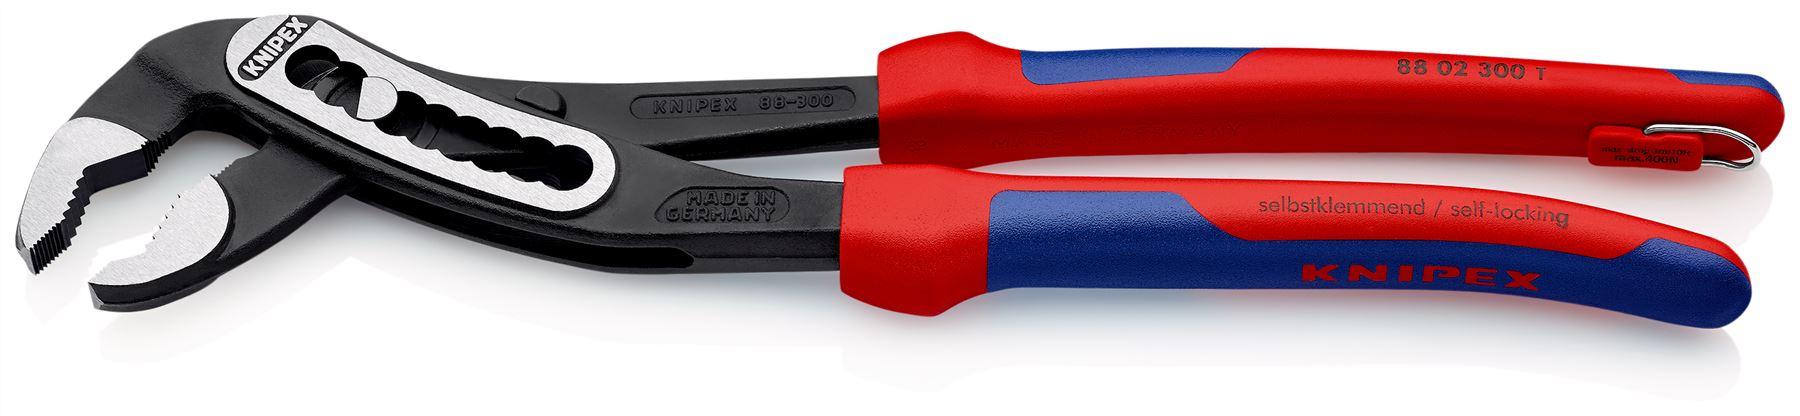 Knipex Alligator® Water Pump Pliers 70mm Capacity 300mm Multi Component Grips Tether Point 88 02 300 T